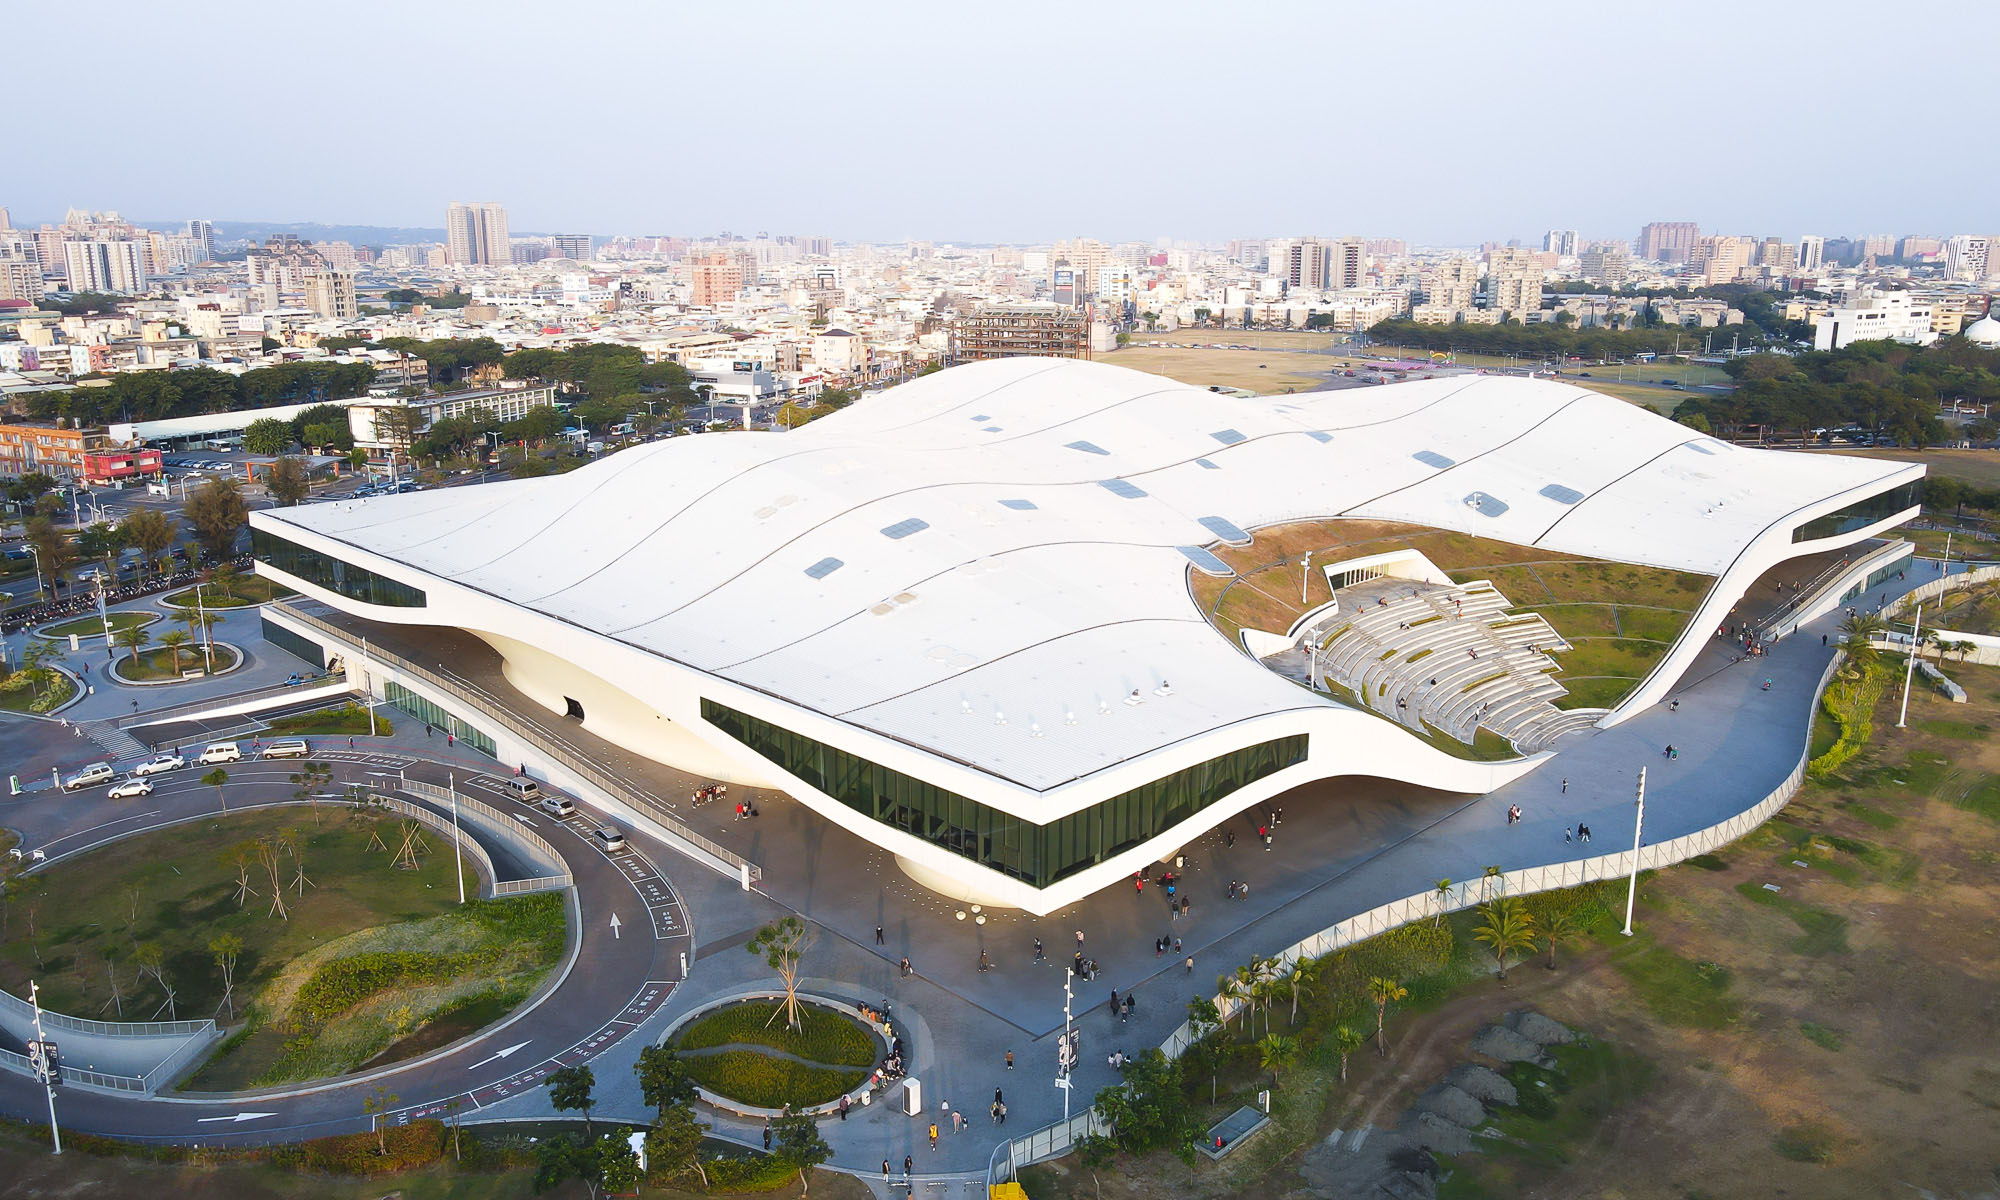 The National Kaohsiung Center for the Arts (Weiwuying) complex viewed from above.